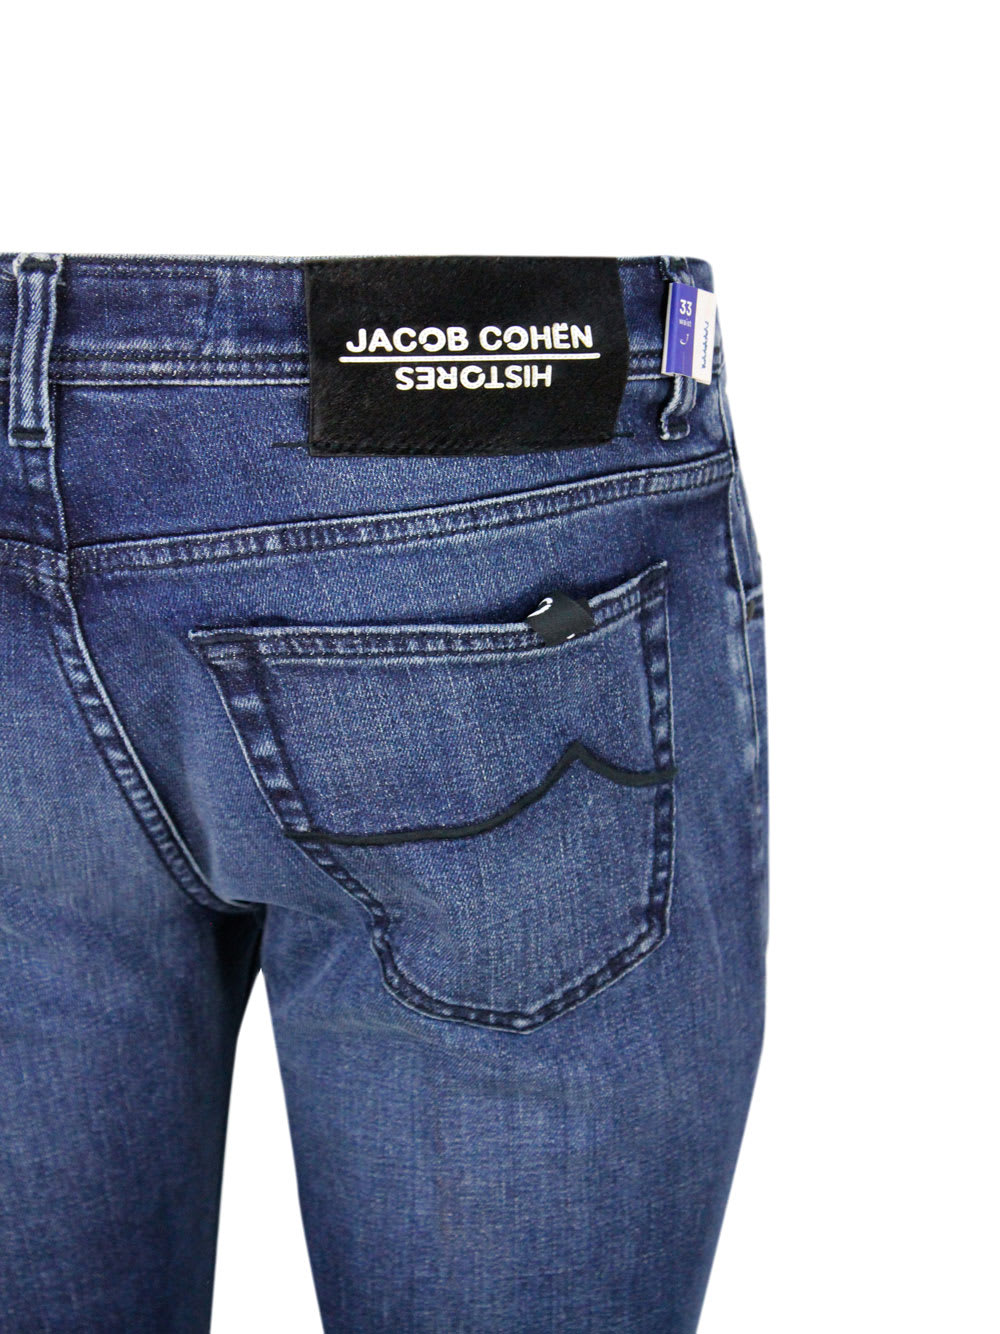 Shop Jacob Cohen Histores Special Scott Trousers In Luxury Edition In 5-pocket Stretch Denim With Buttons Closure And